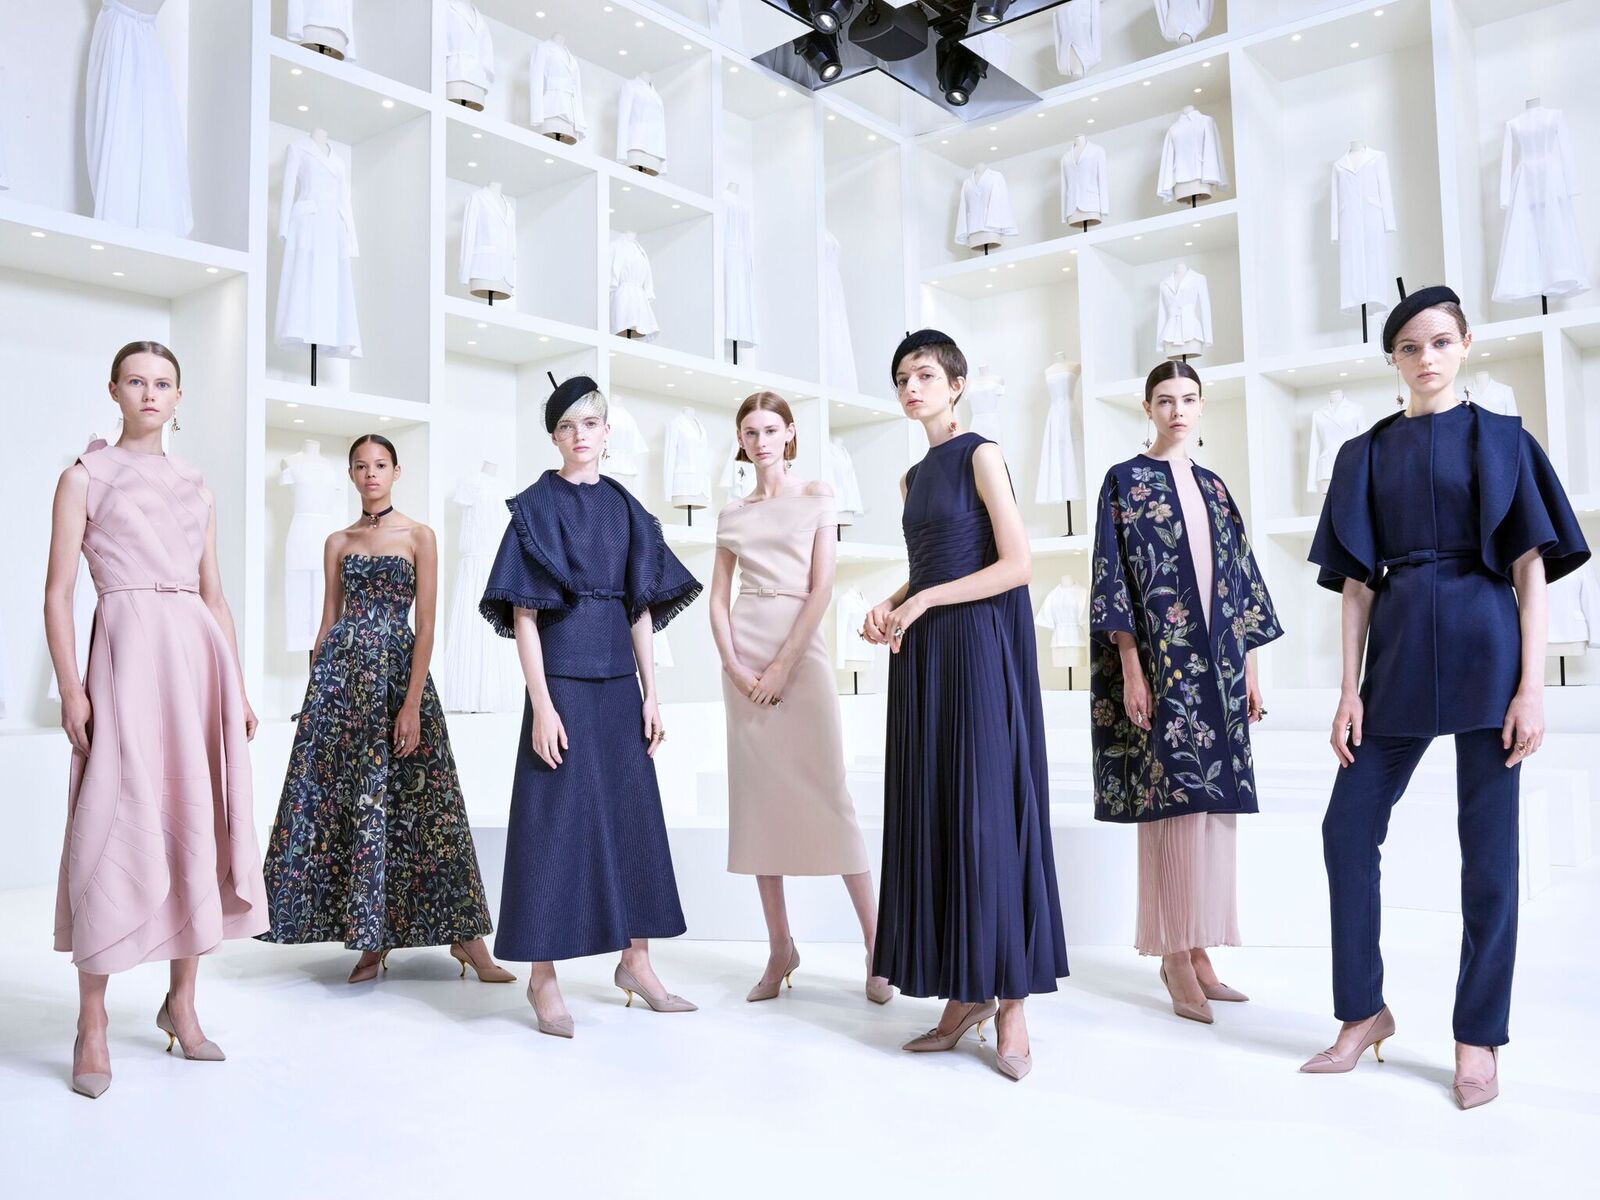 Dior’s 2019 Haute Couture Collection is Here